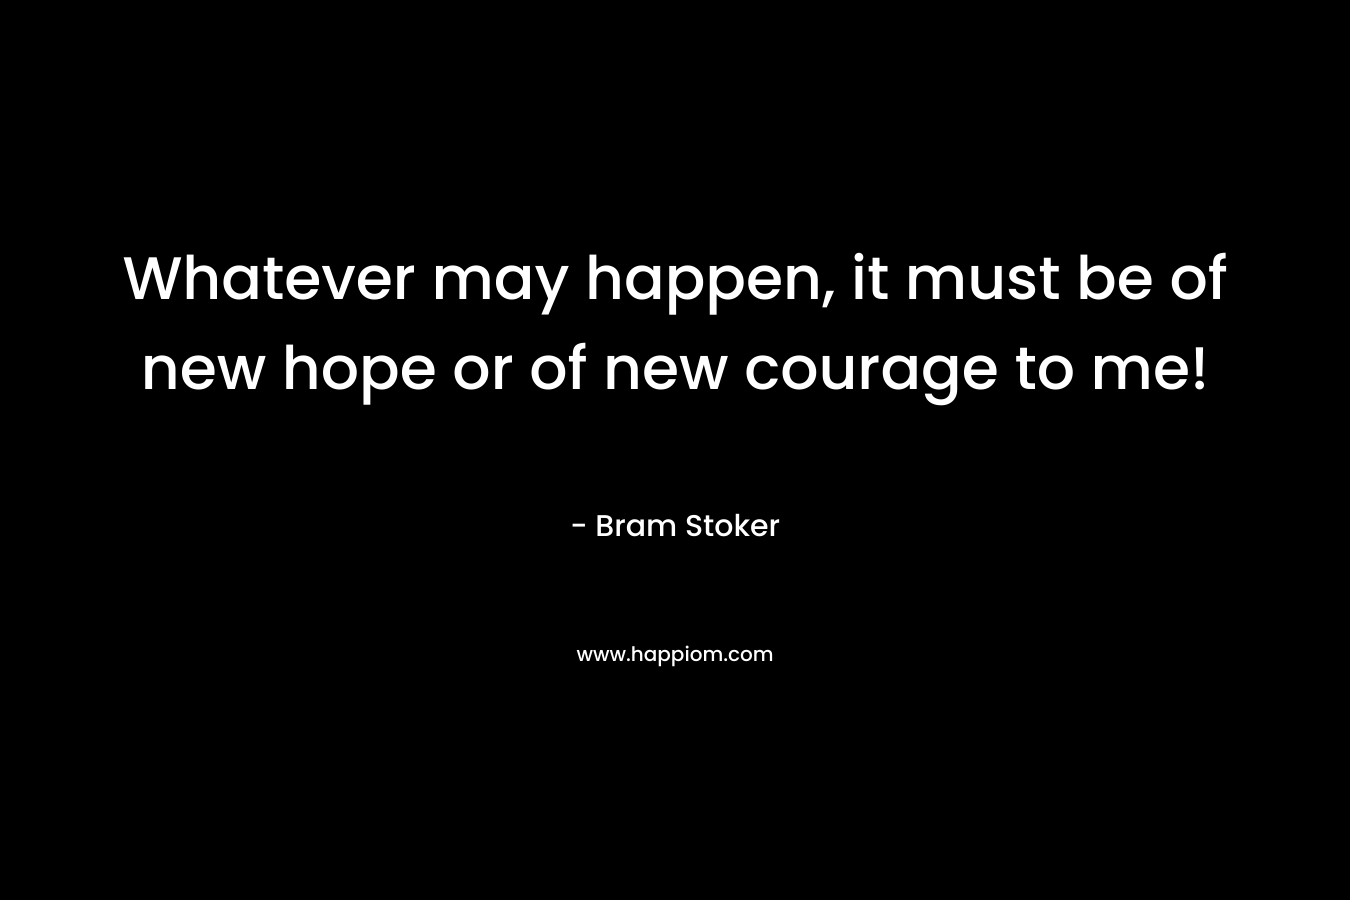 Whatever may happen, it must be of new hope or of new courage to me! – Bram Stoker